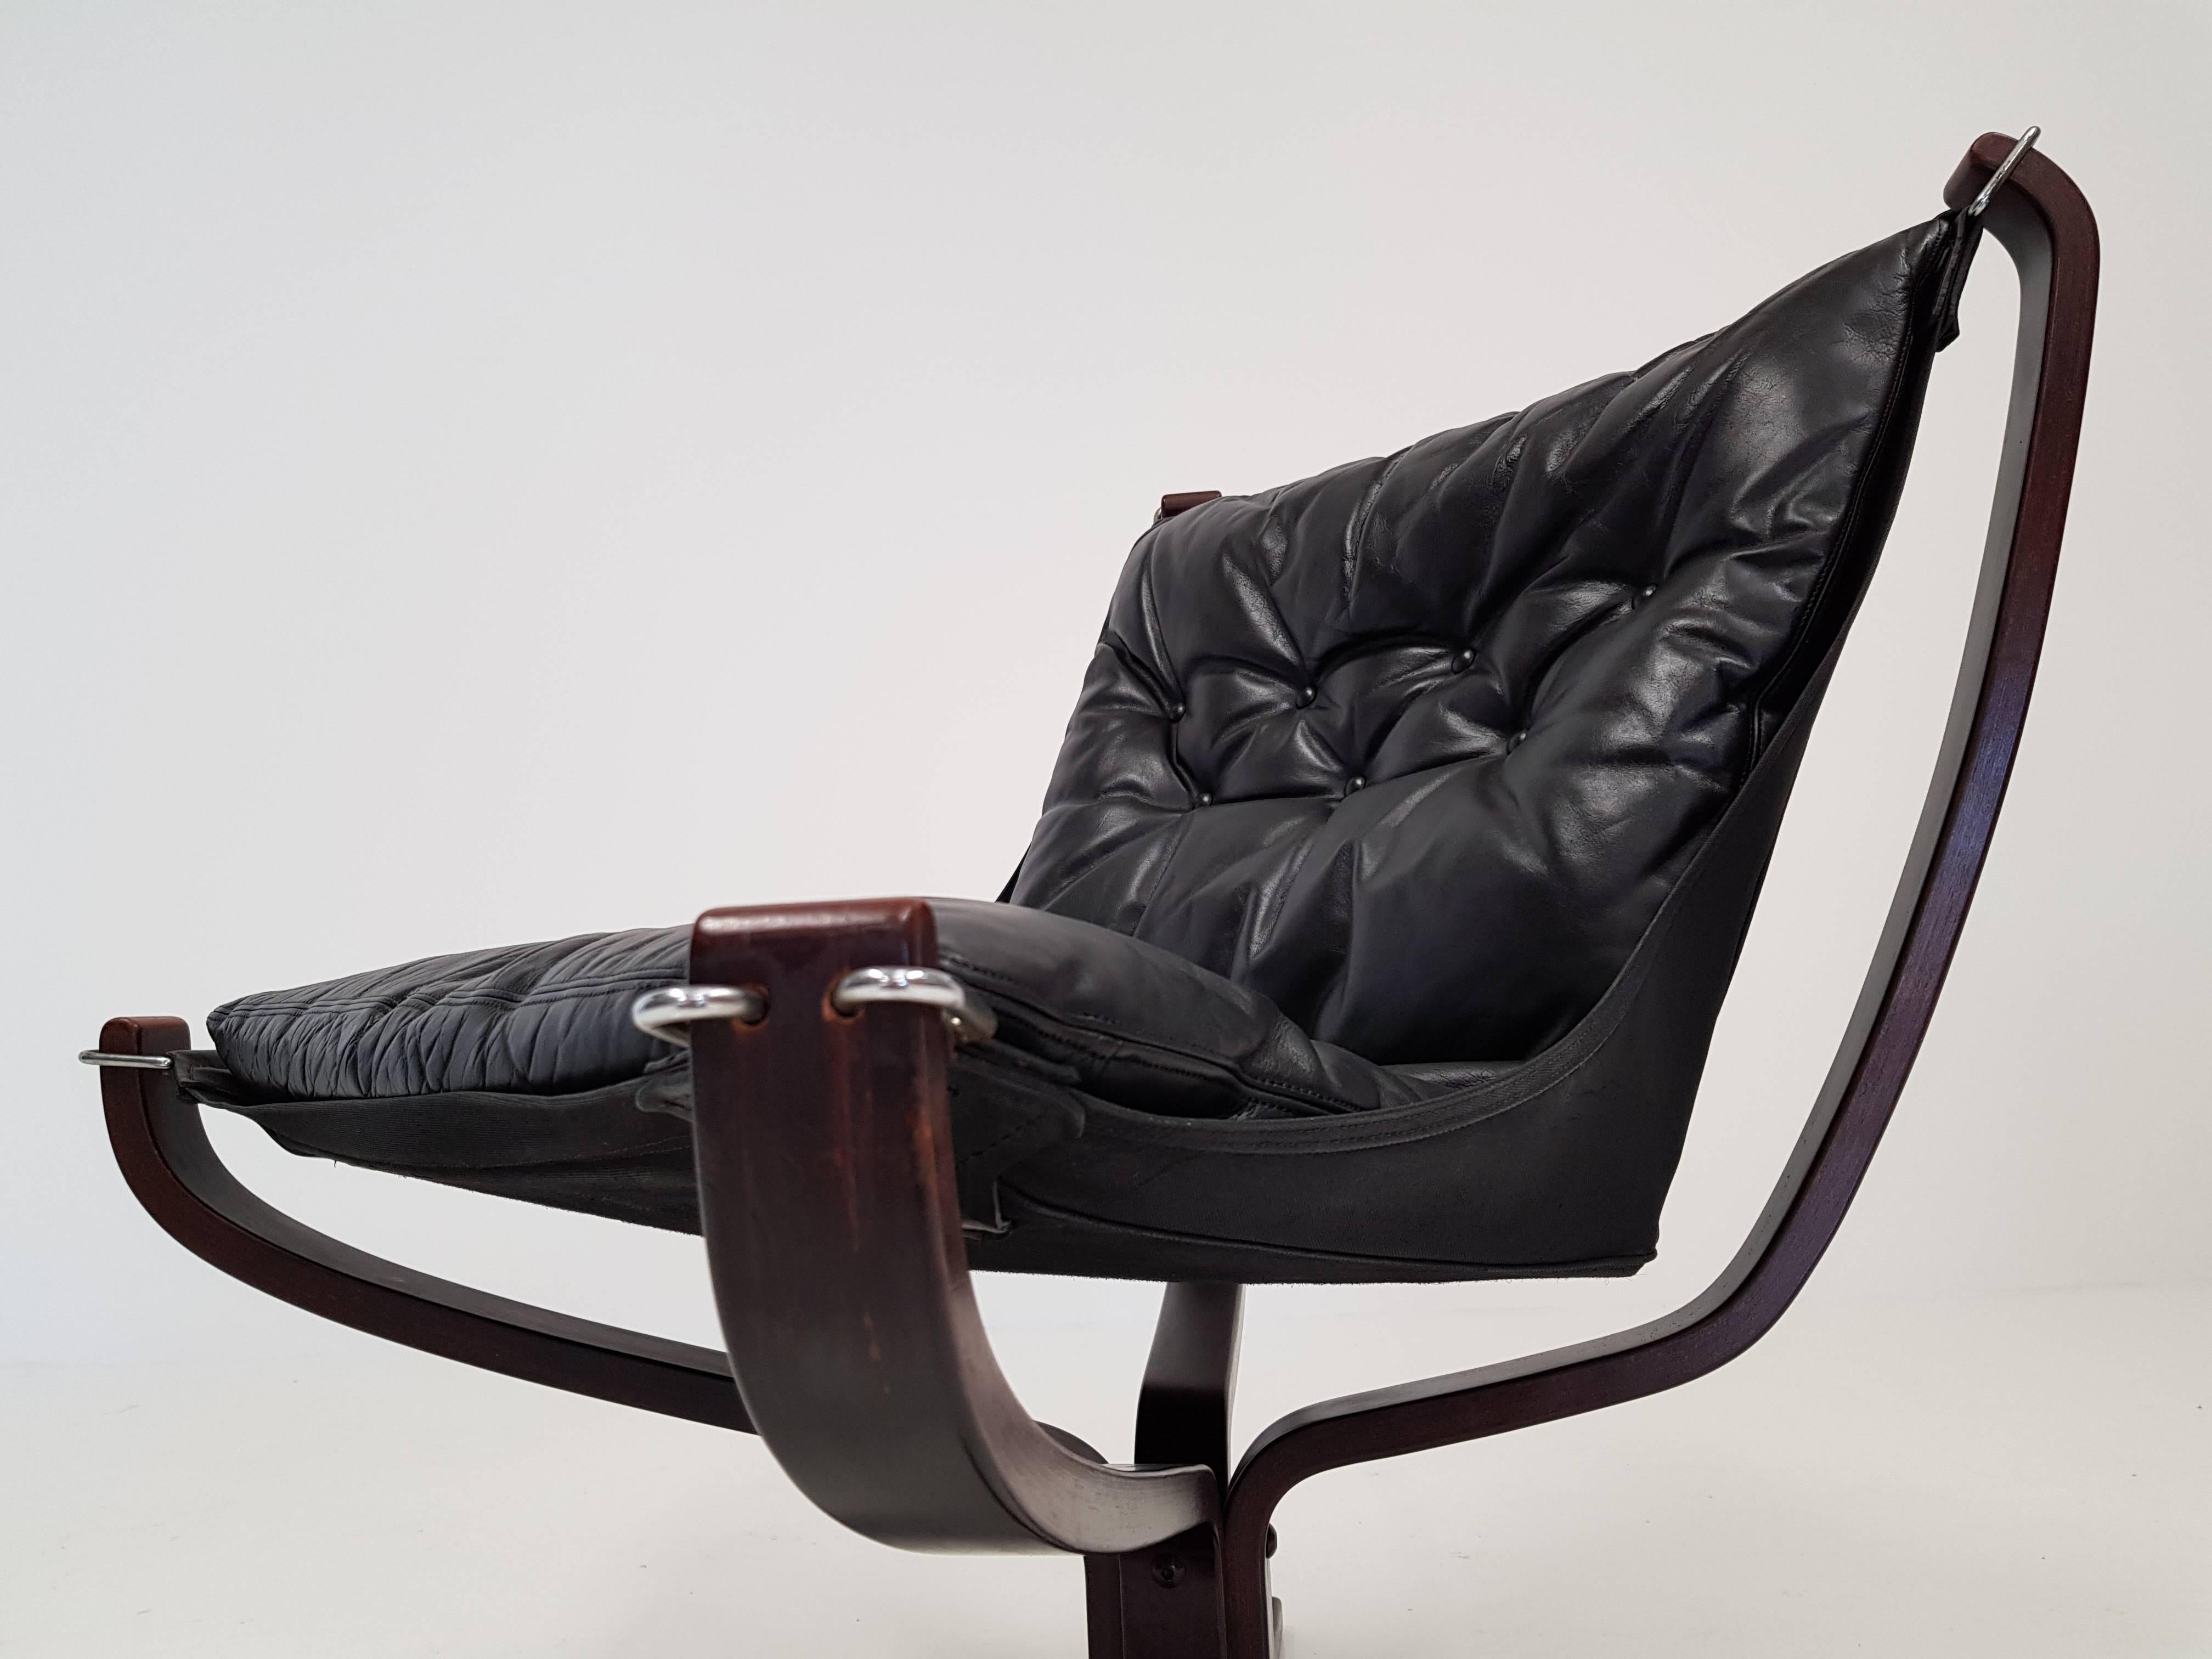 Leather Vintage Low-Backed X-Framed Sigurd Ressell Designed Falcon Chair, 1970s